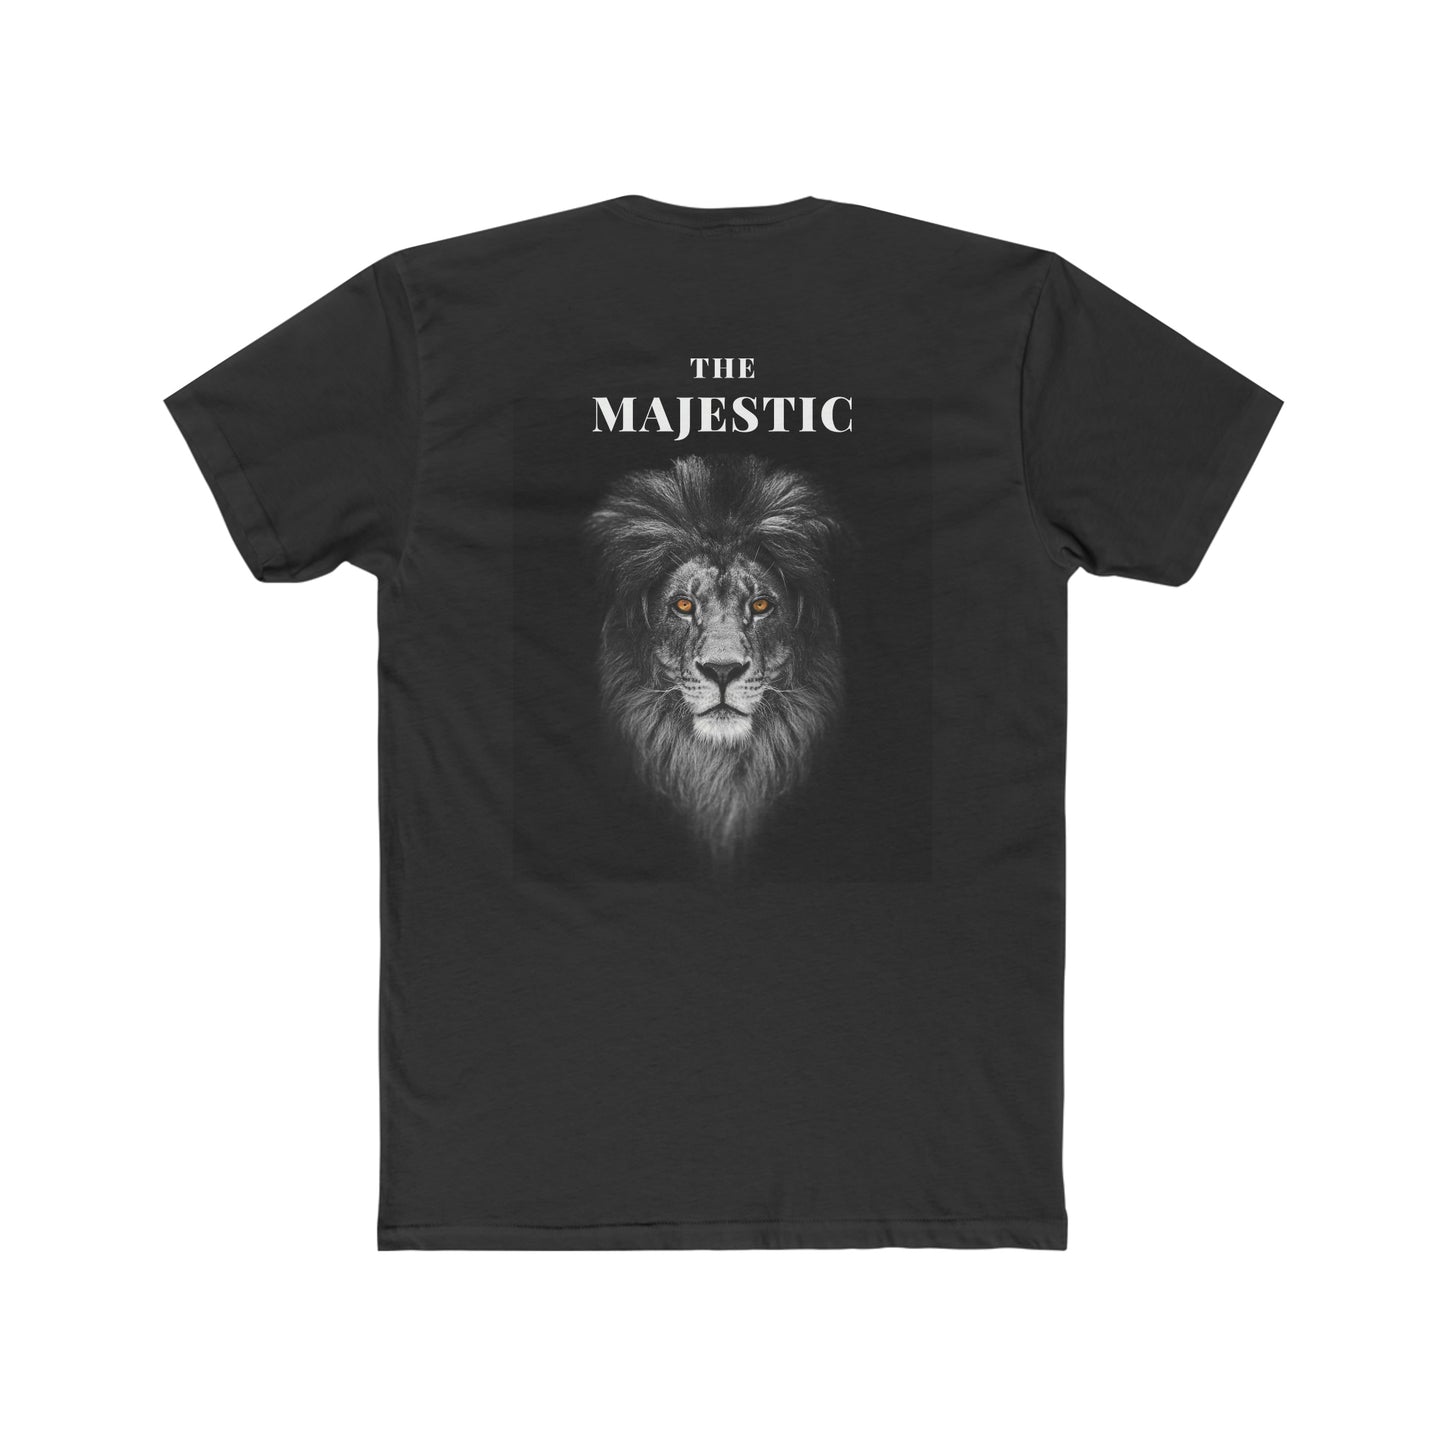 A Comfortable Tee  Men's and Women Cotton Crew Tee with Bold Lion Graphic and Inspirational Quote - Be Bold and Make a Statement